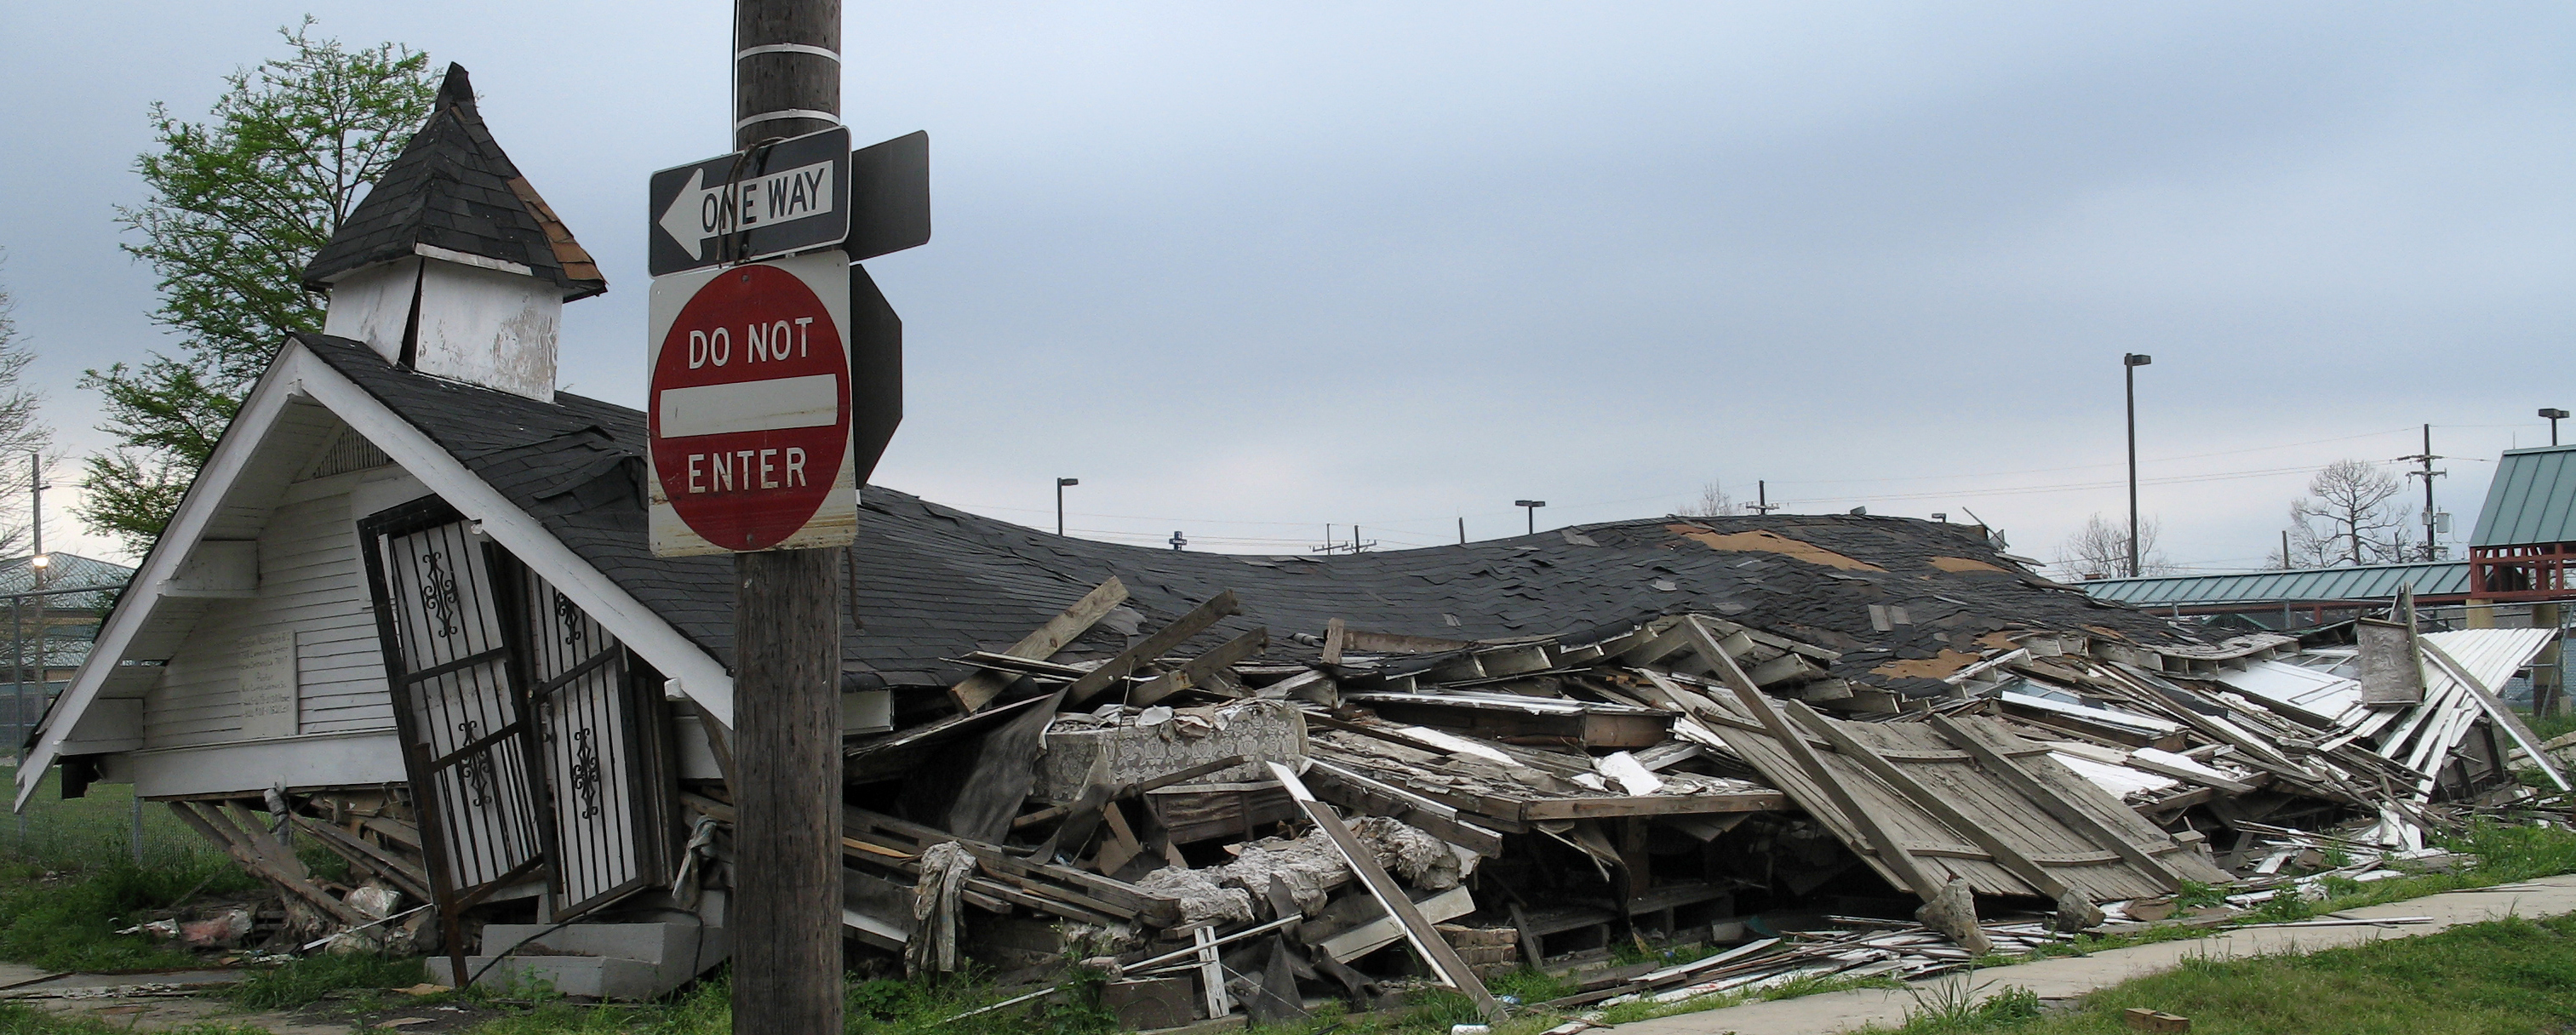 Collapsed church sits in the deserted Lower Ninth Ward neighborhood of New Orleans seven months post-Katrina